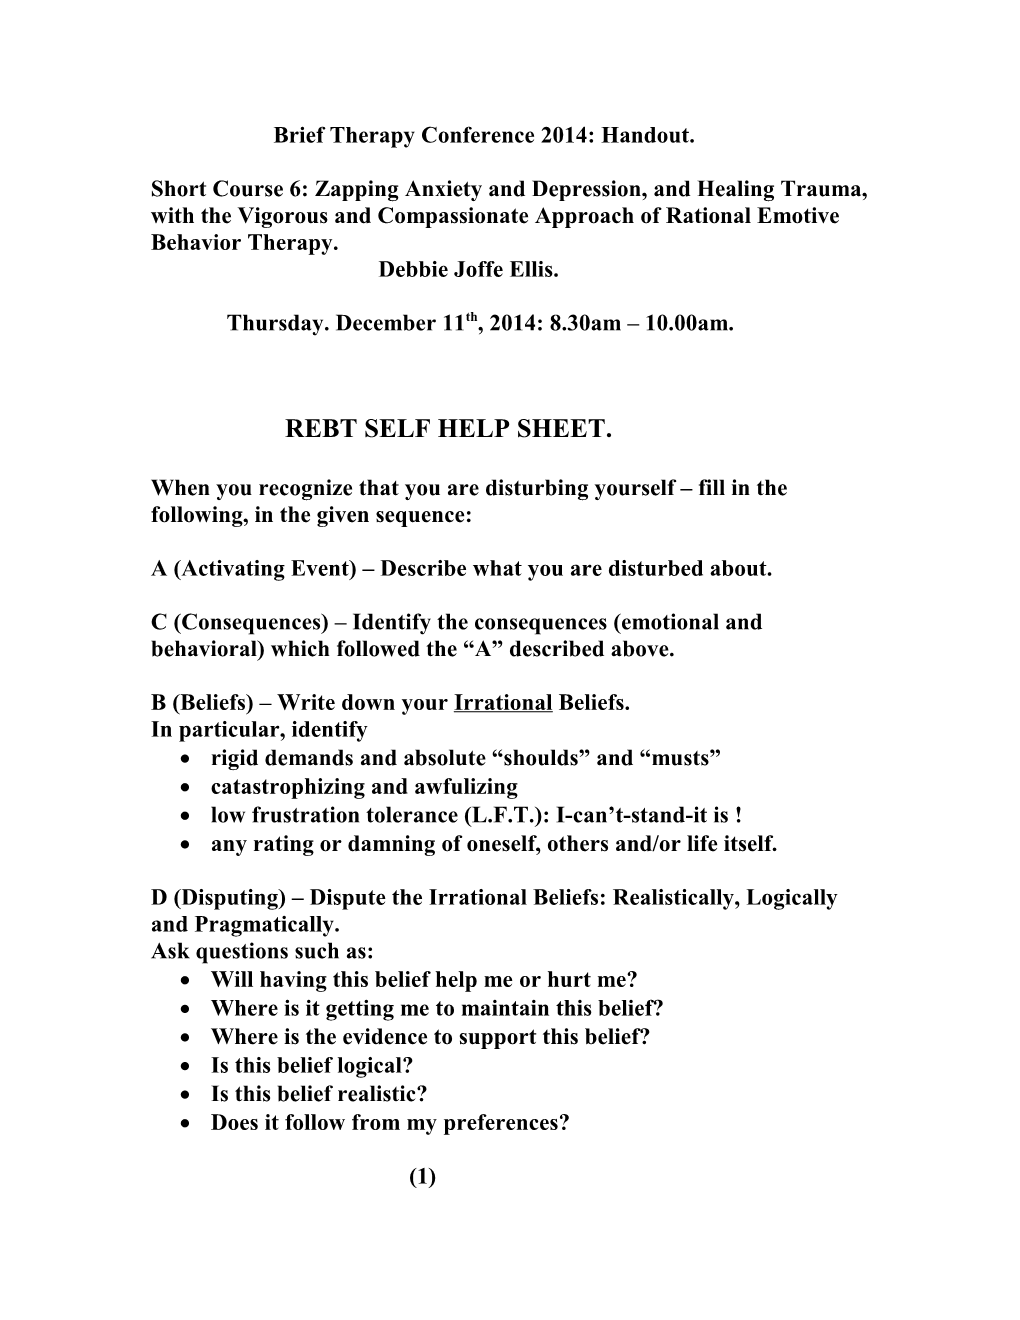 Brief Therapy Conference 2012 Handout